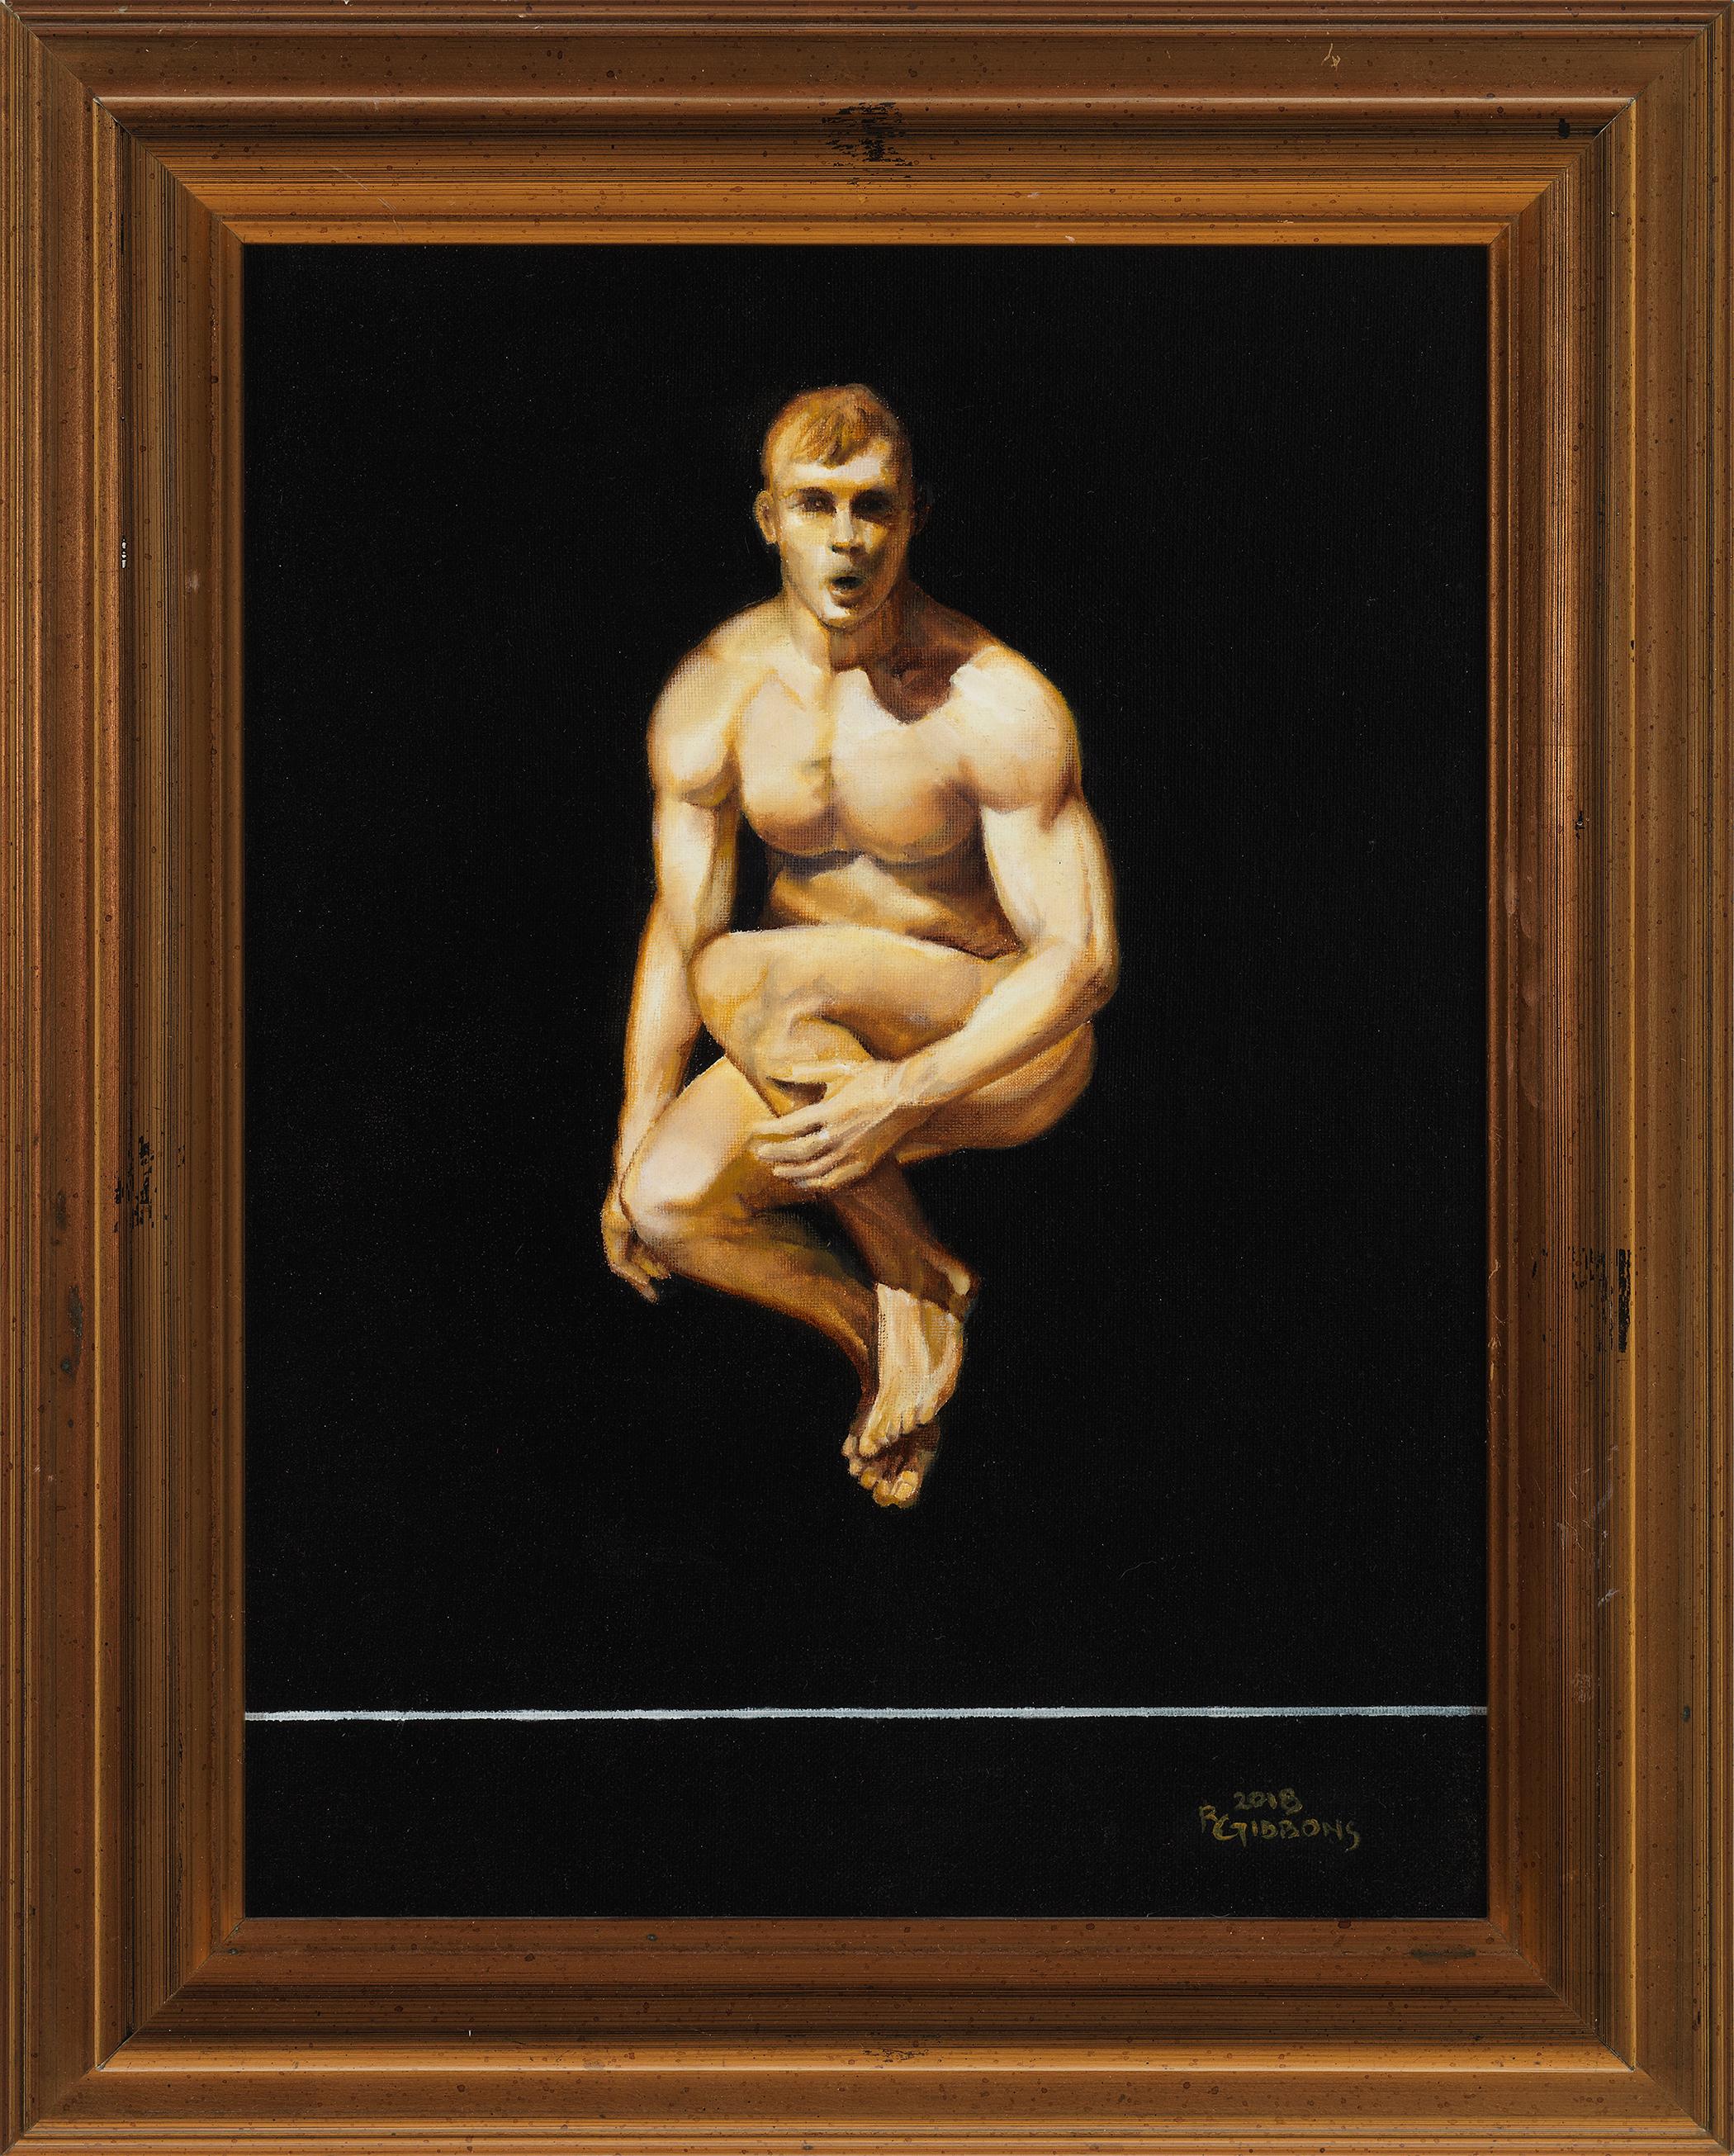 Leaping II - Male Nude on Black Background, Oil on Panel